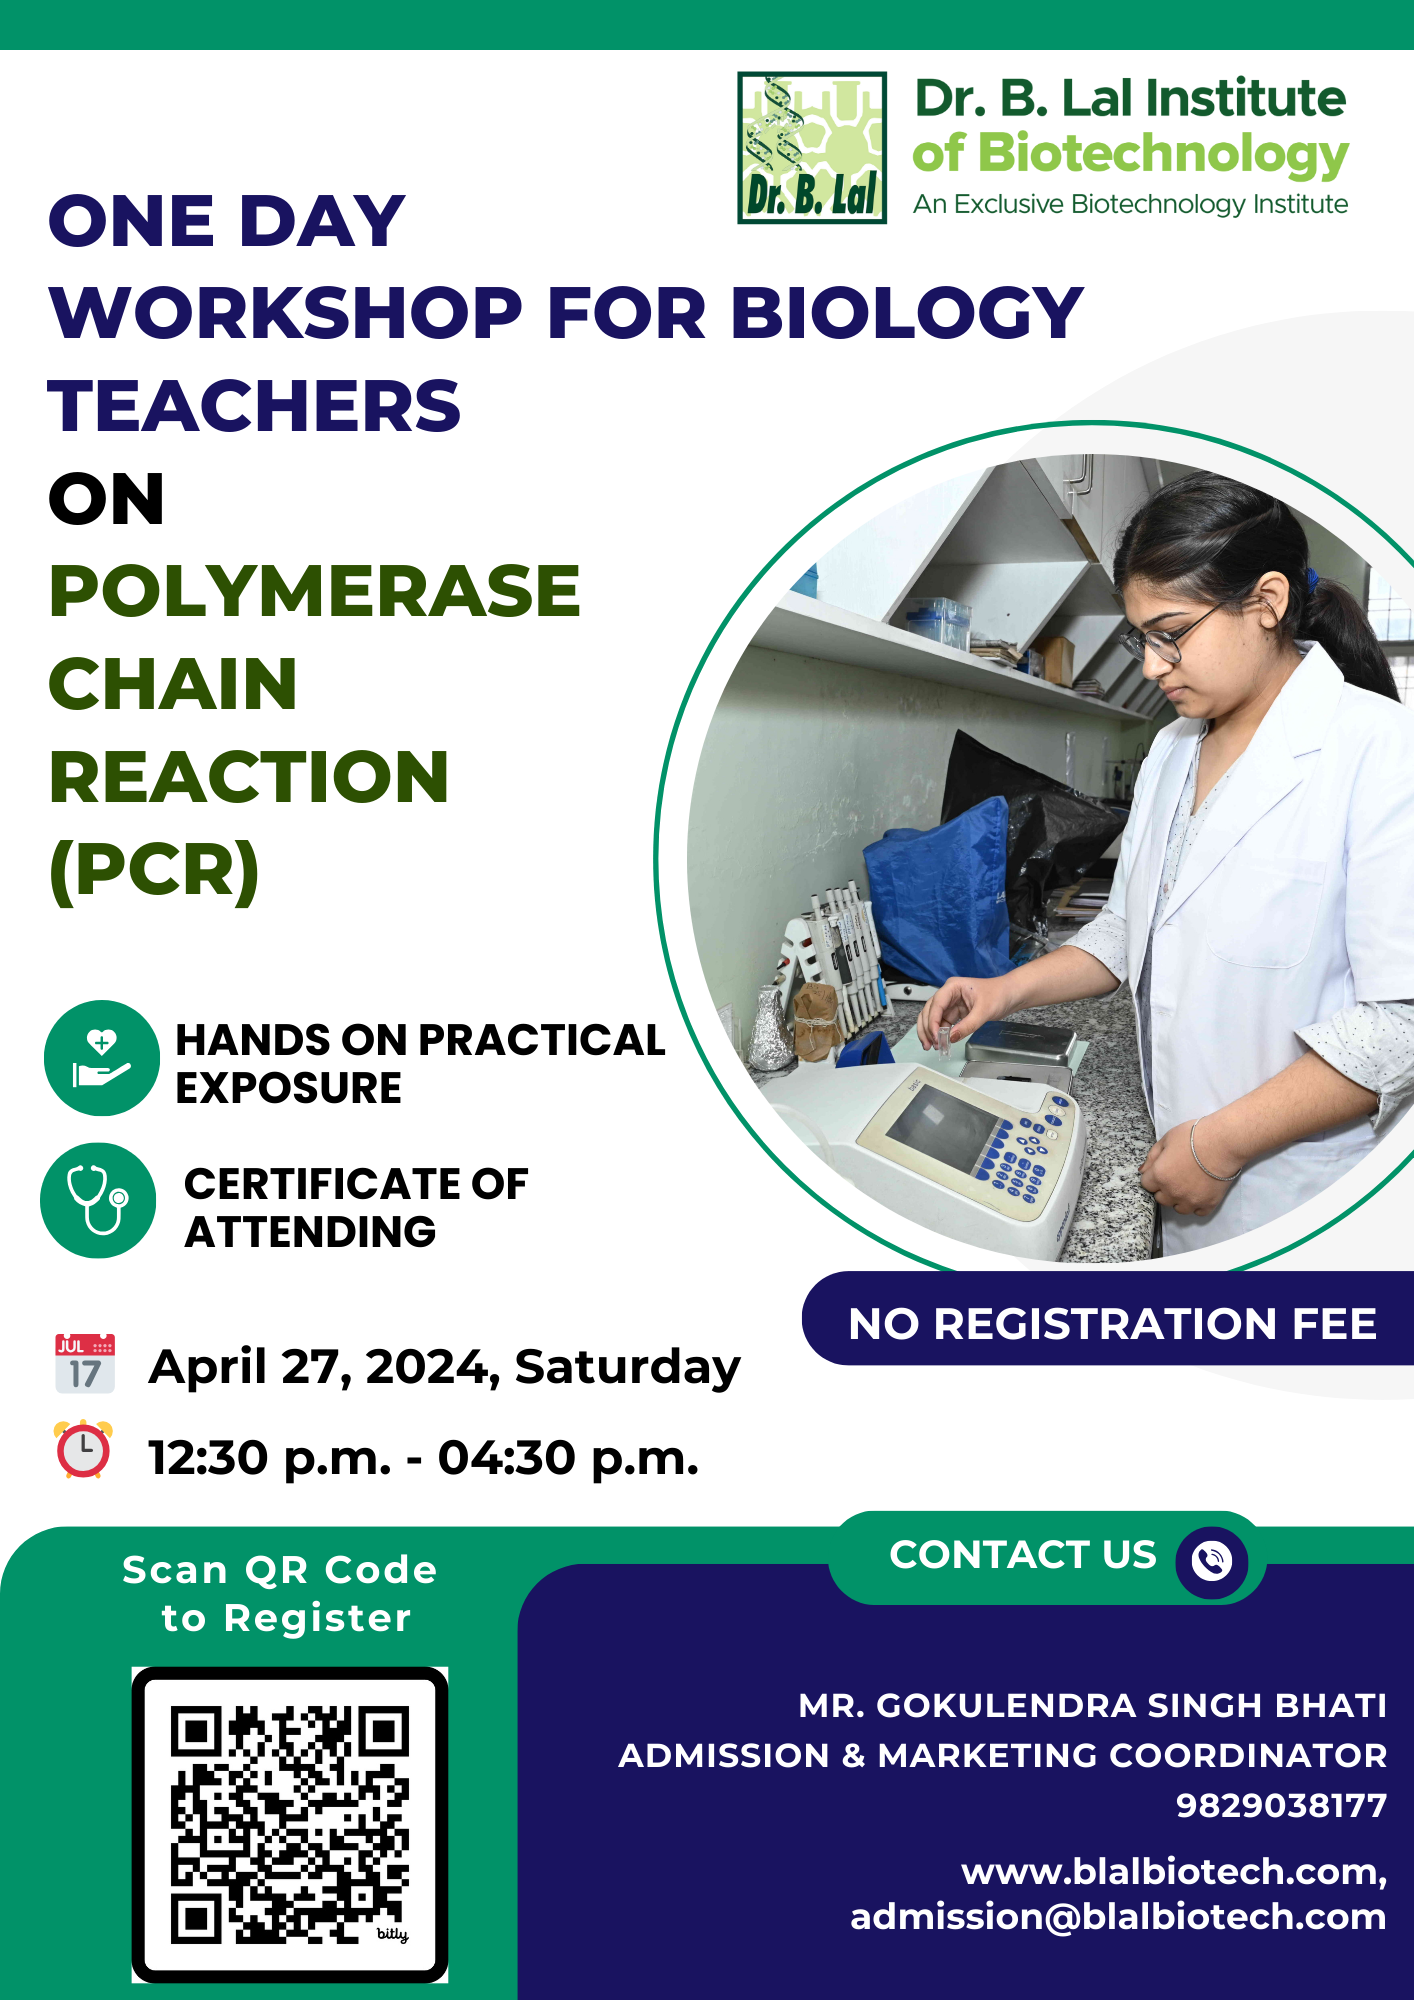 One Day Workshop for School Biology Teachers on Polymerase Chain Reaction